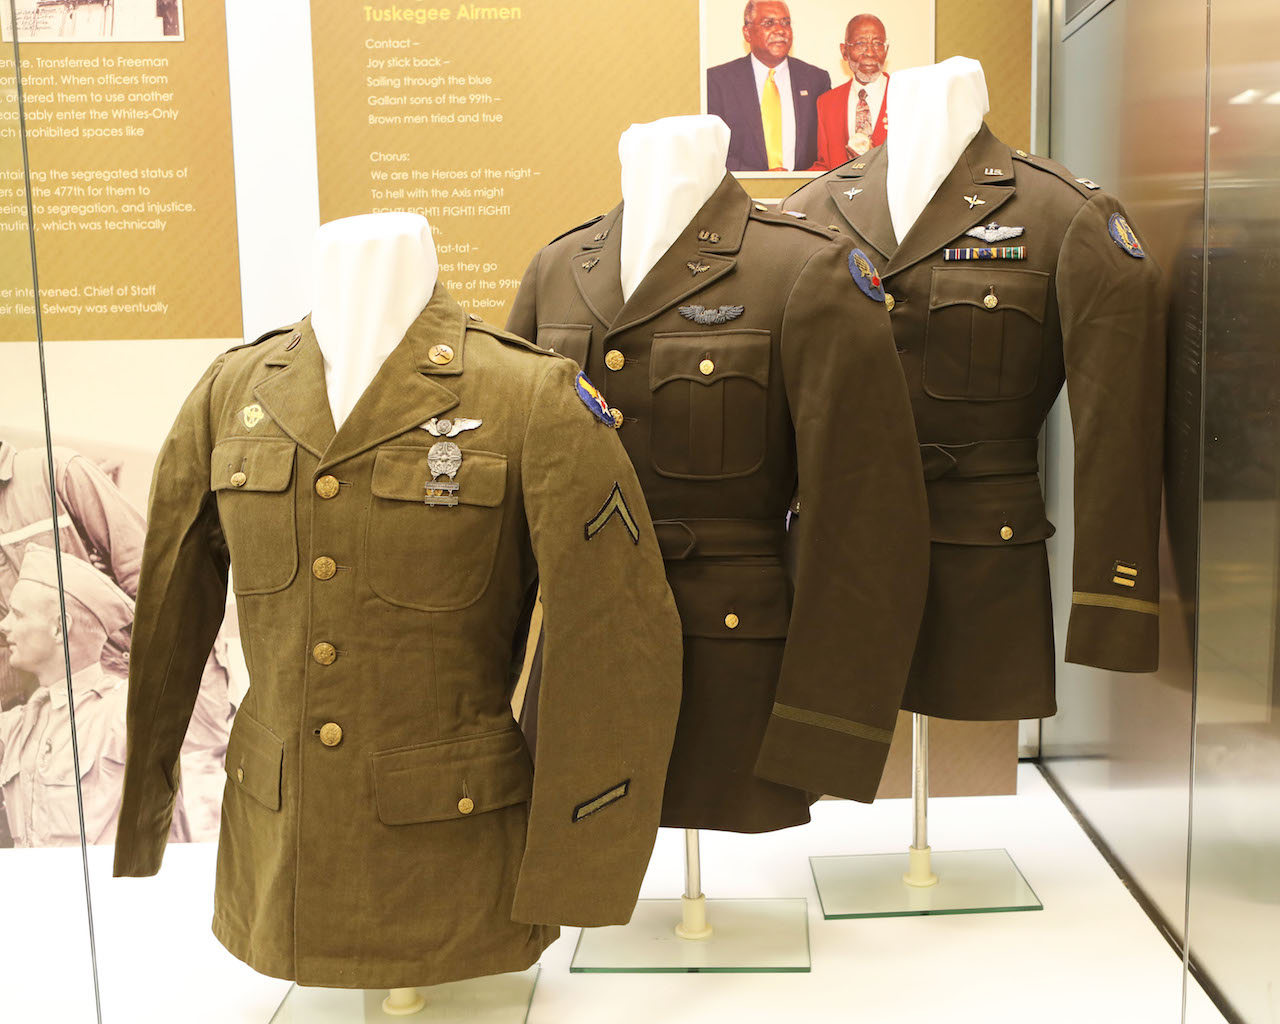 WW2 Army Officer’s Dress Coat Belonging to William J. Faulkner who was killed on November 7, 1944. Faulkner was a graduate of Morehouse College in Atlanta. On Loan from the Alan B. Taylor Collection, Springfield Ohio